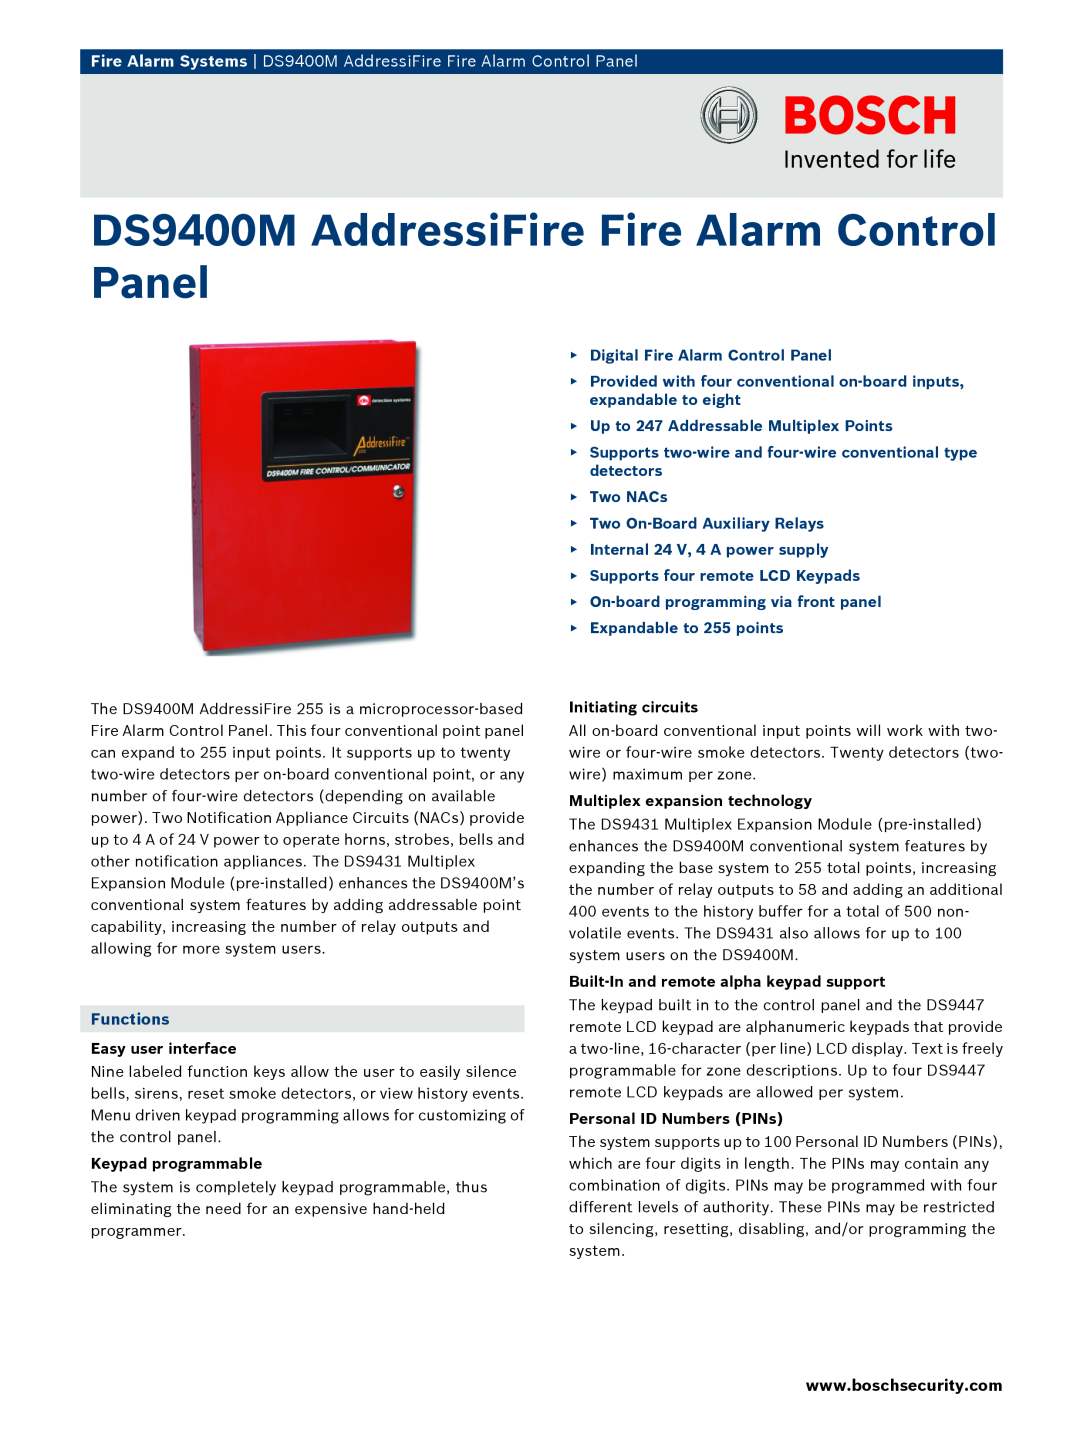 Bosch Appliances DS9400Ms manual Fire Alarm Systems DS9400M AddressiFire Fire Alarm Control Panel, Functions 